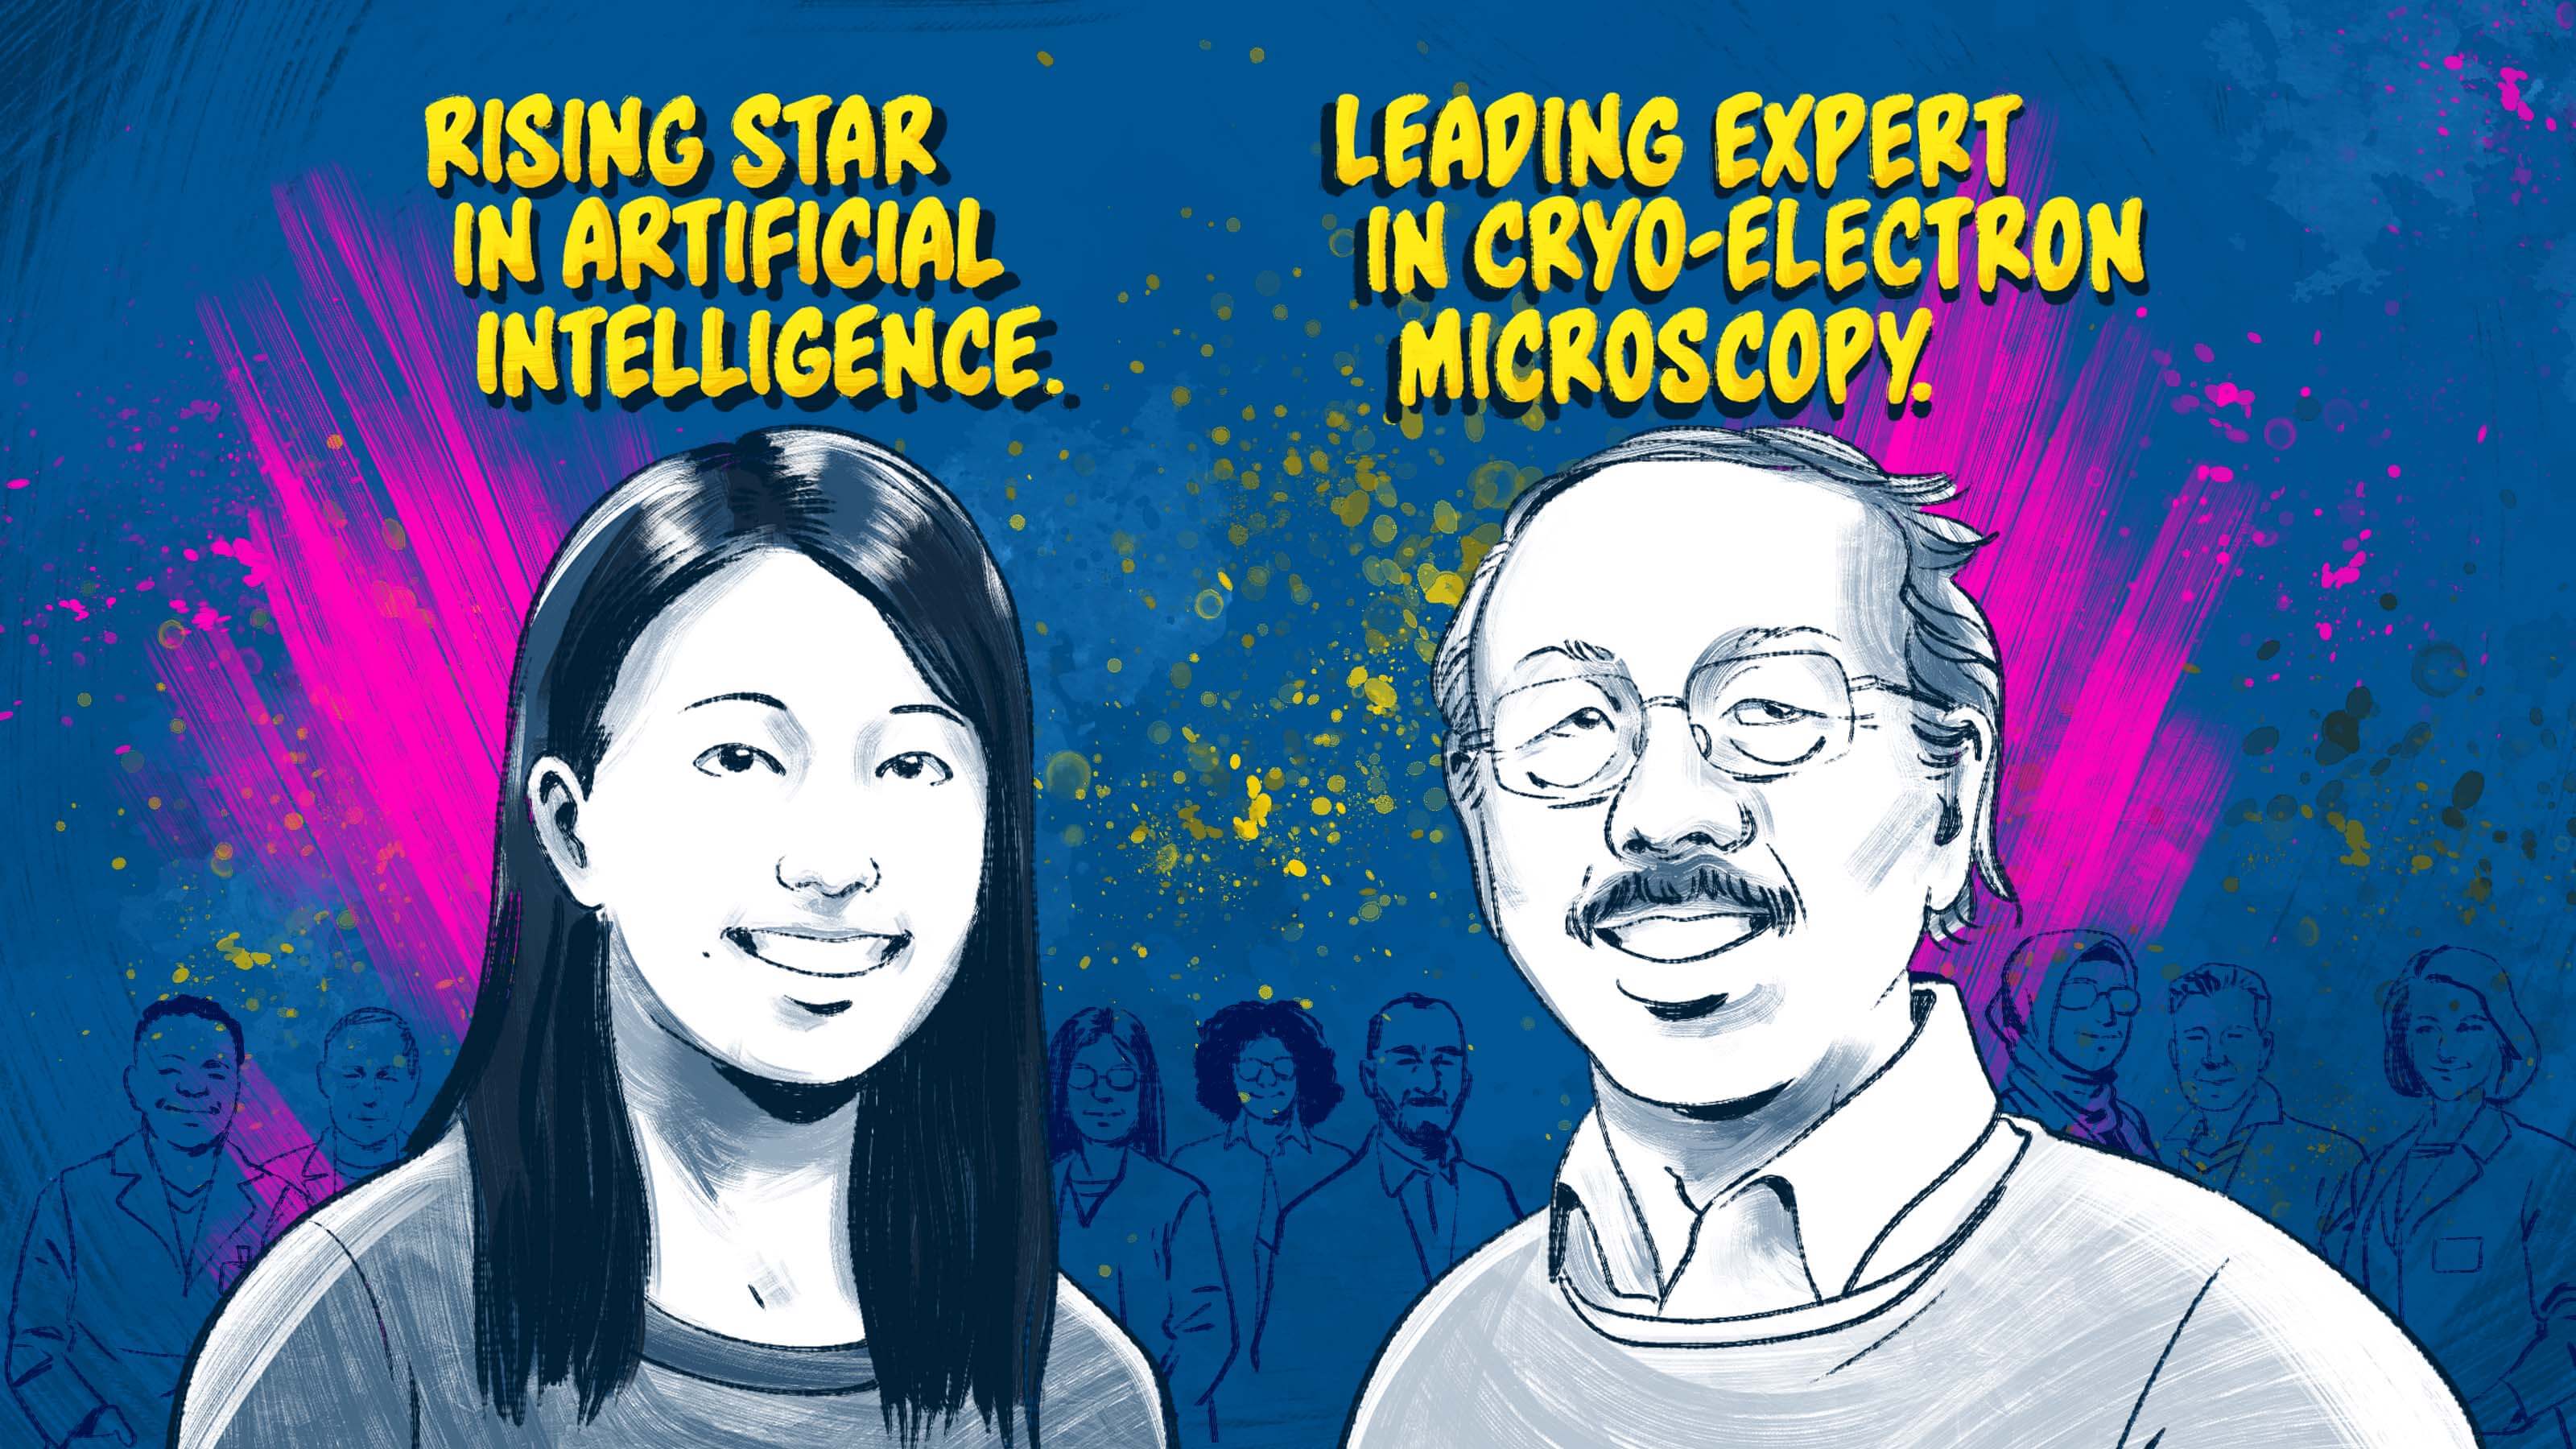 A colorful illustration of a woman with the words “Rising Star in Artificial Intelligence” above her head. Next to her is a drawing of a man with the words “Leading Expert in Cryo-Electron Microscopy” above his head.